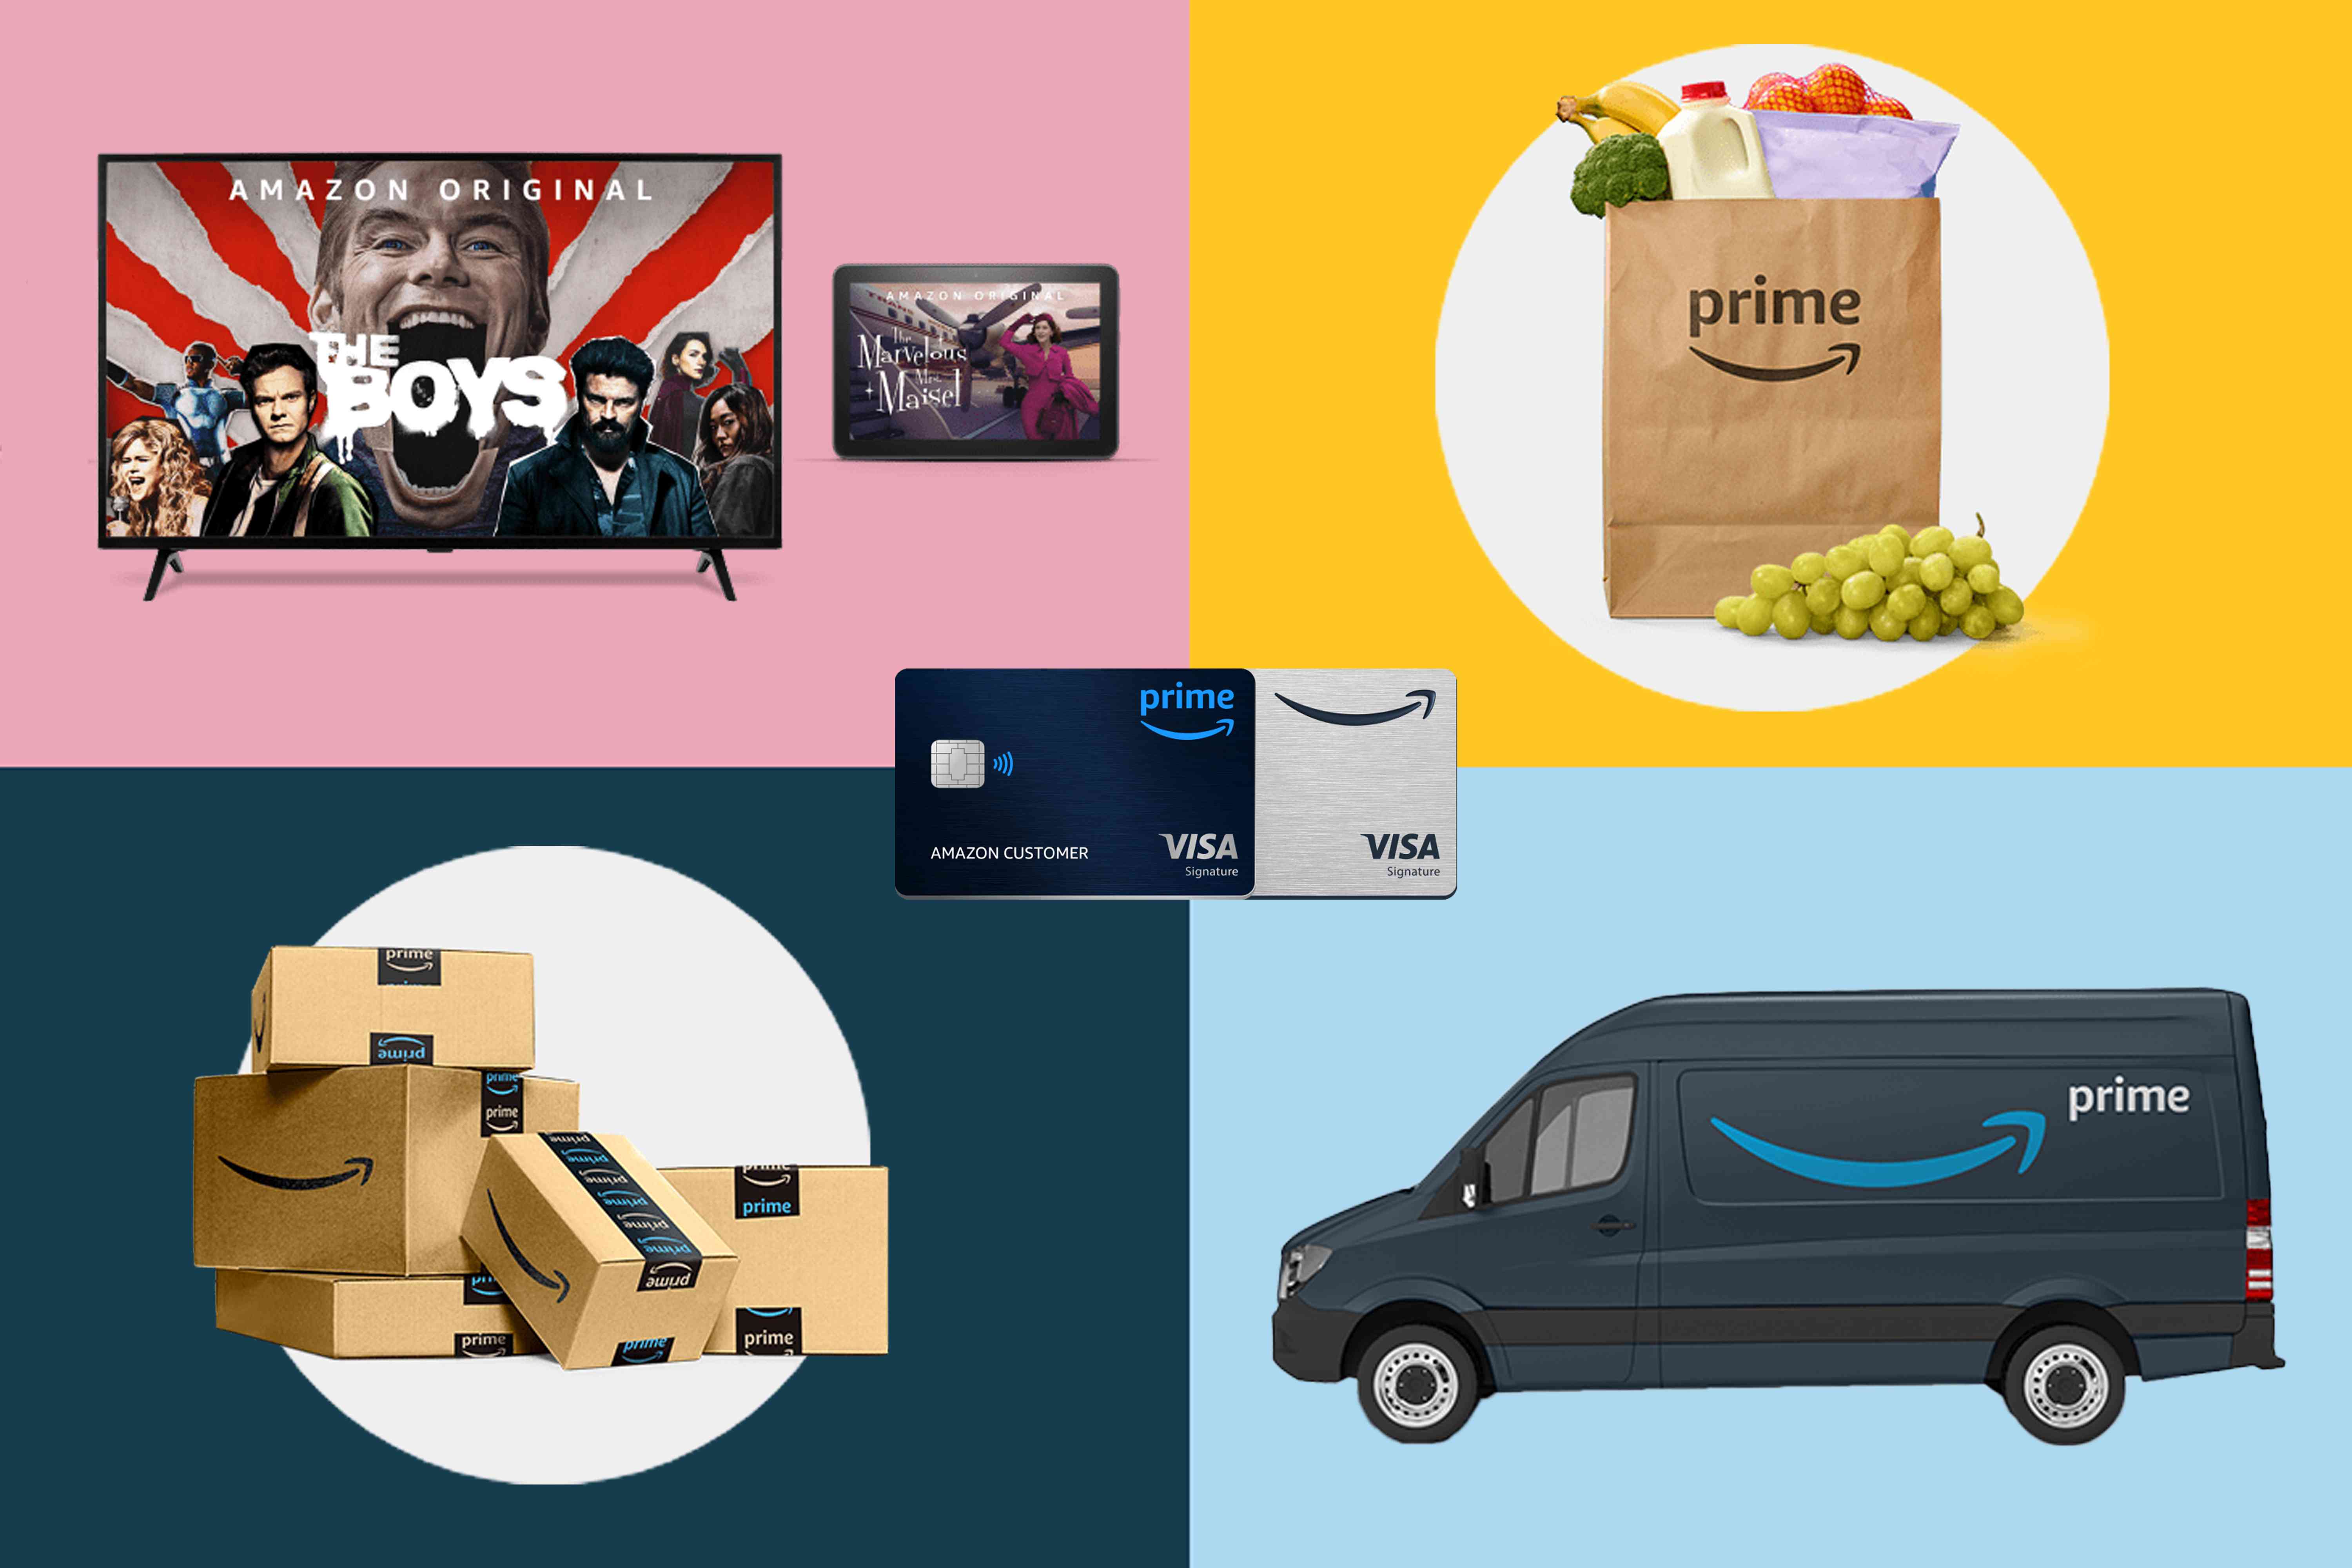 Amazon Prime Membership 101: Everything to Know About Prime Member Perks, Plus How to Sign Up for Free